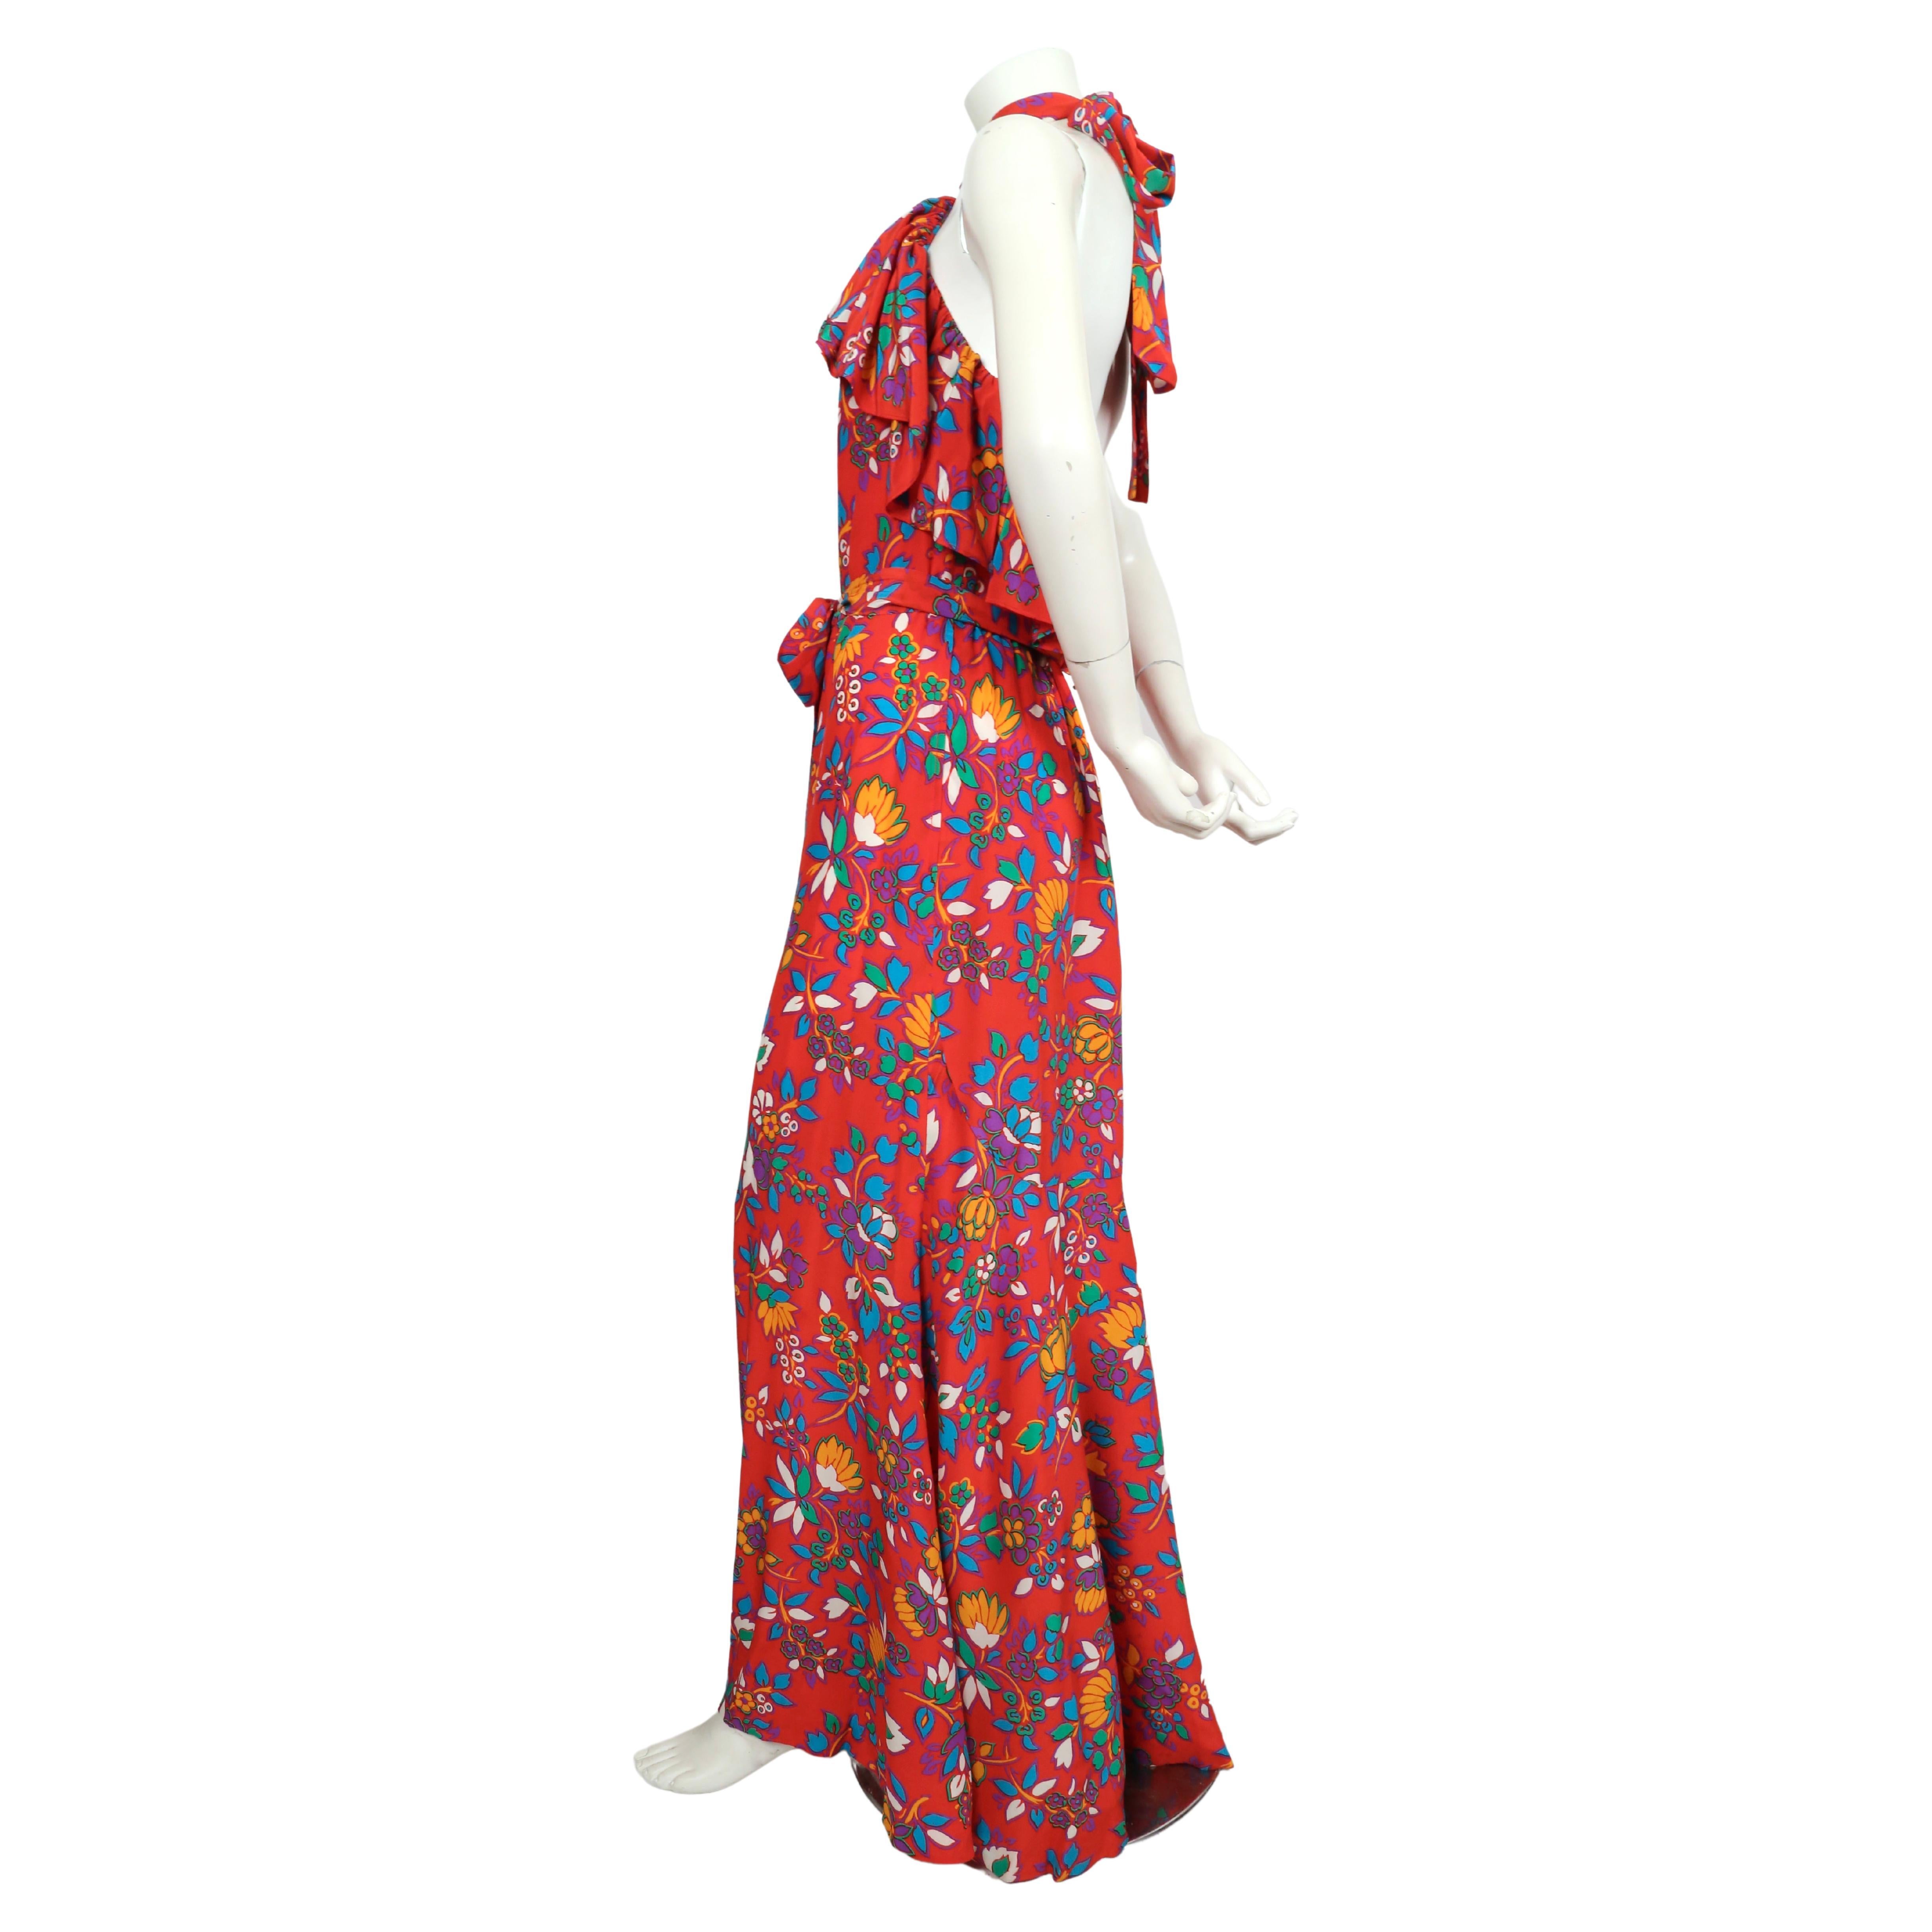 1970's YVES SAINT LAURENT red floral silk halter neck dress with flounce For Sale 3